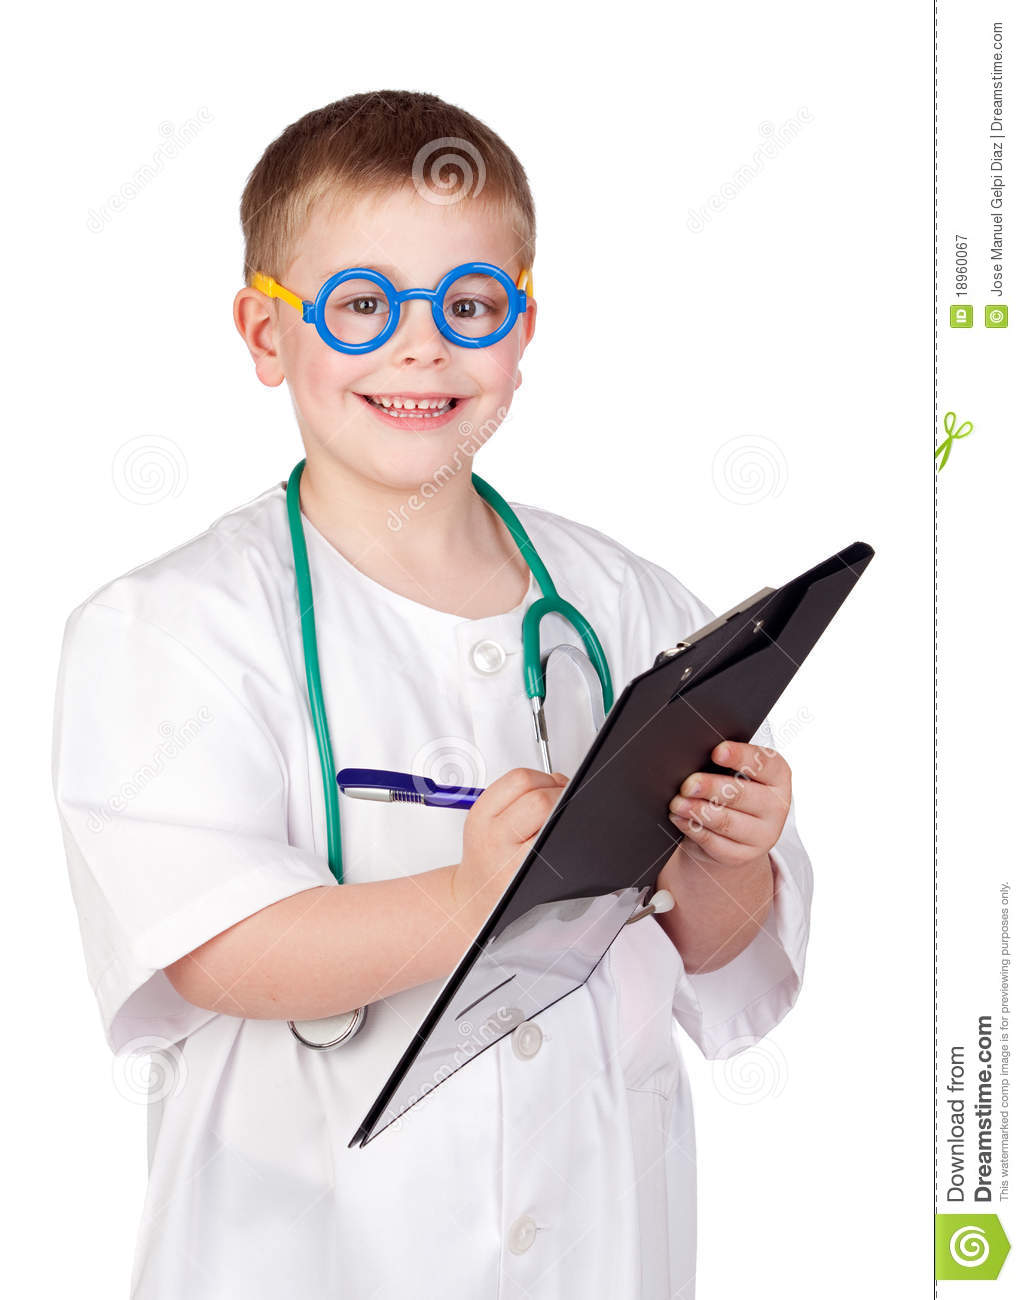 Funny Child With Doctor Uniform Royalty Free Stock Photography   Image    